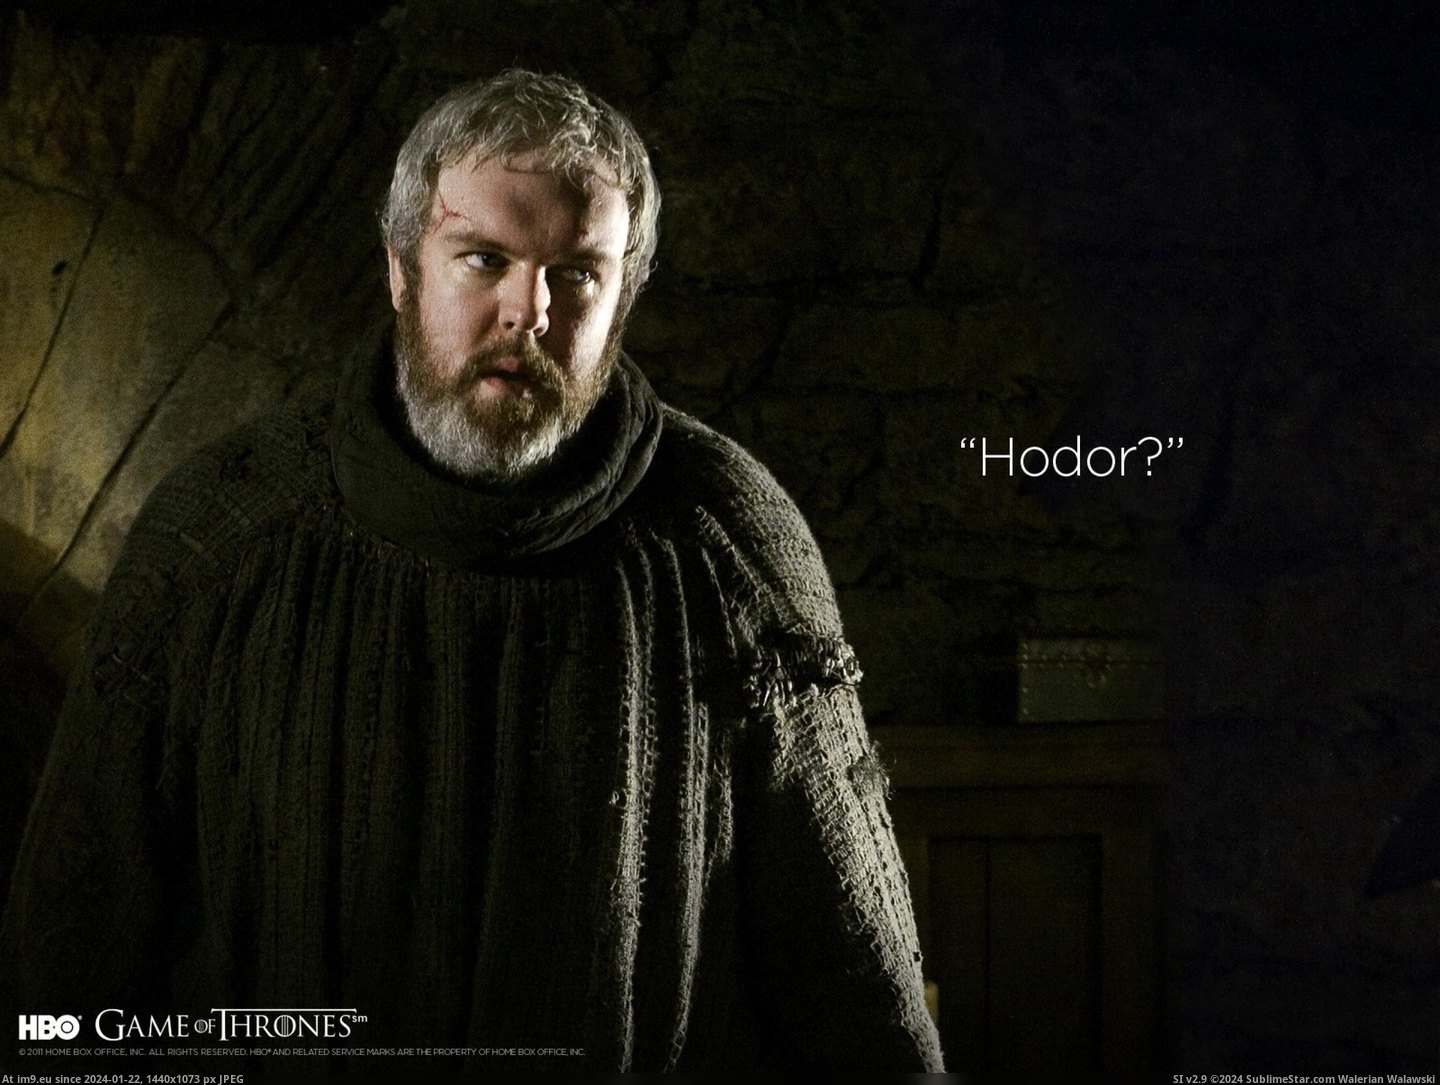  #Hodor  Hodor Pic. (Image of album Game of Thrones ART (A Song of Ice and Fire)))